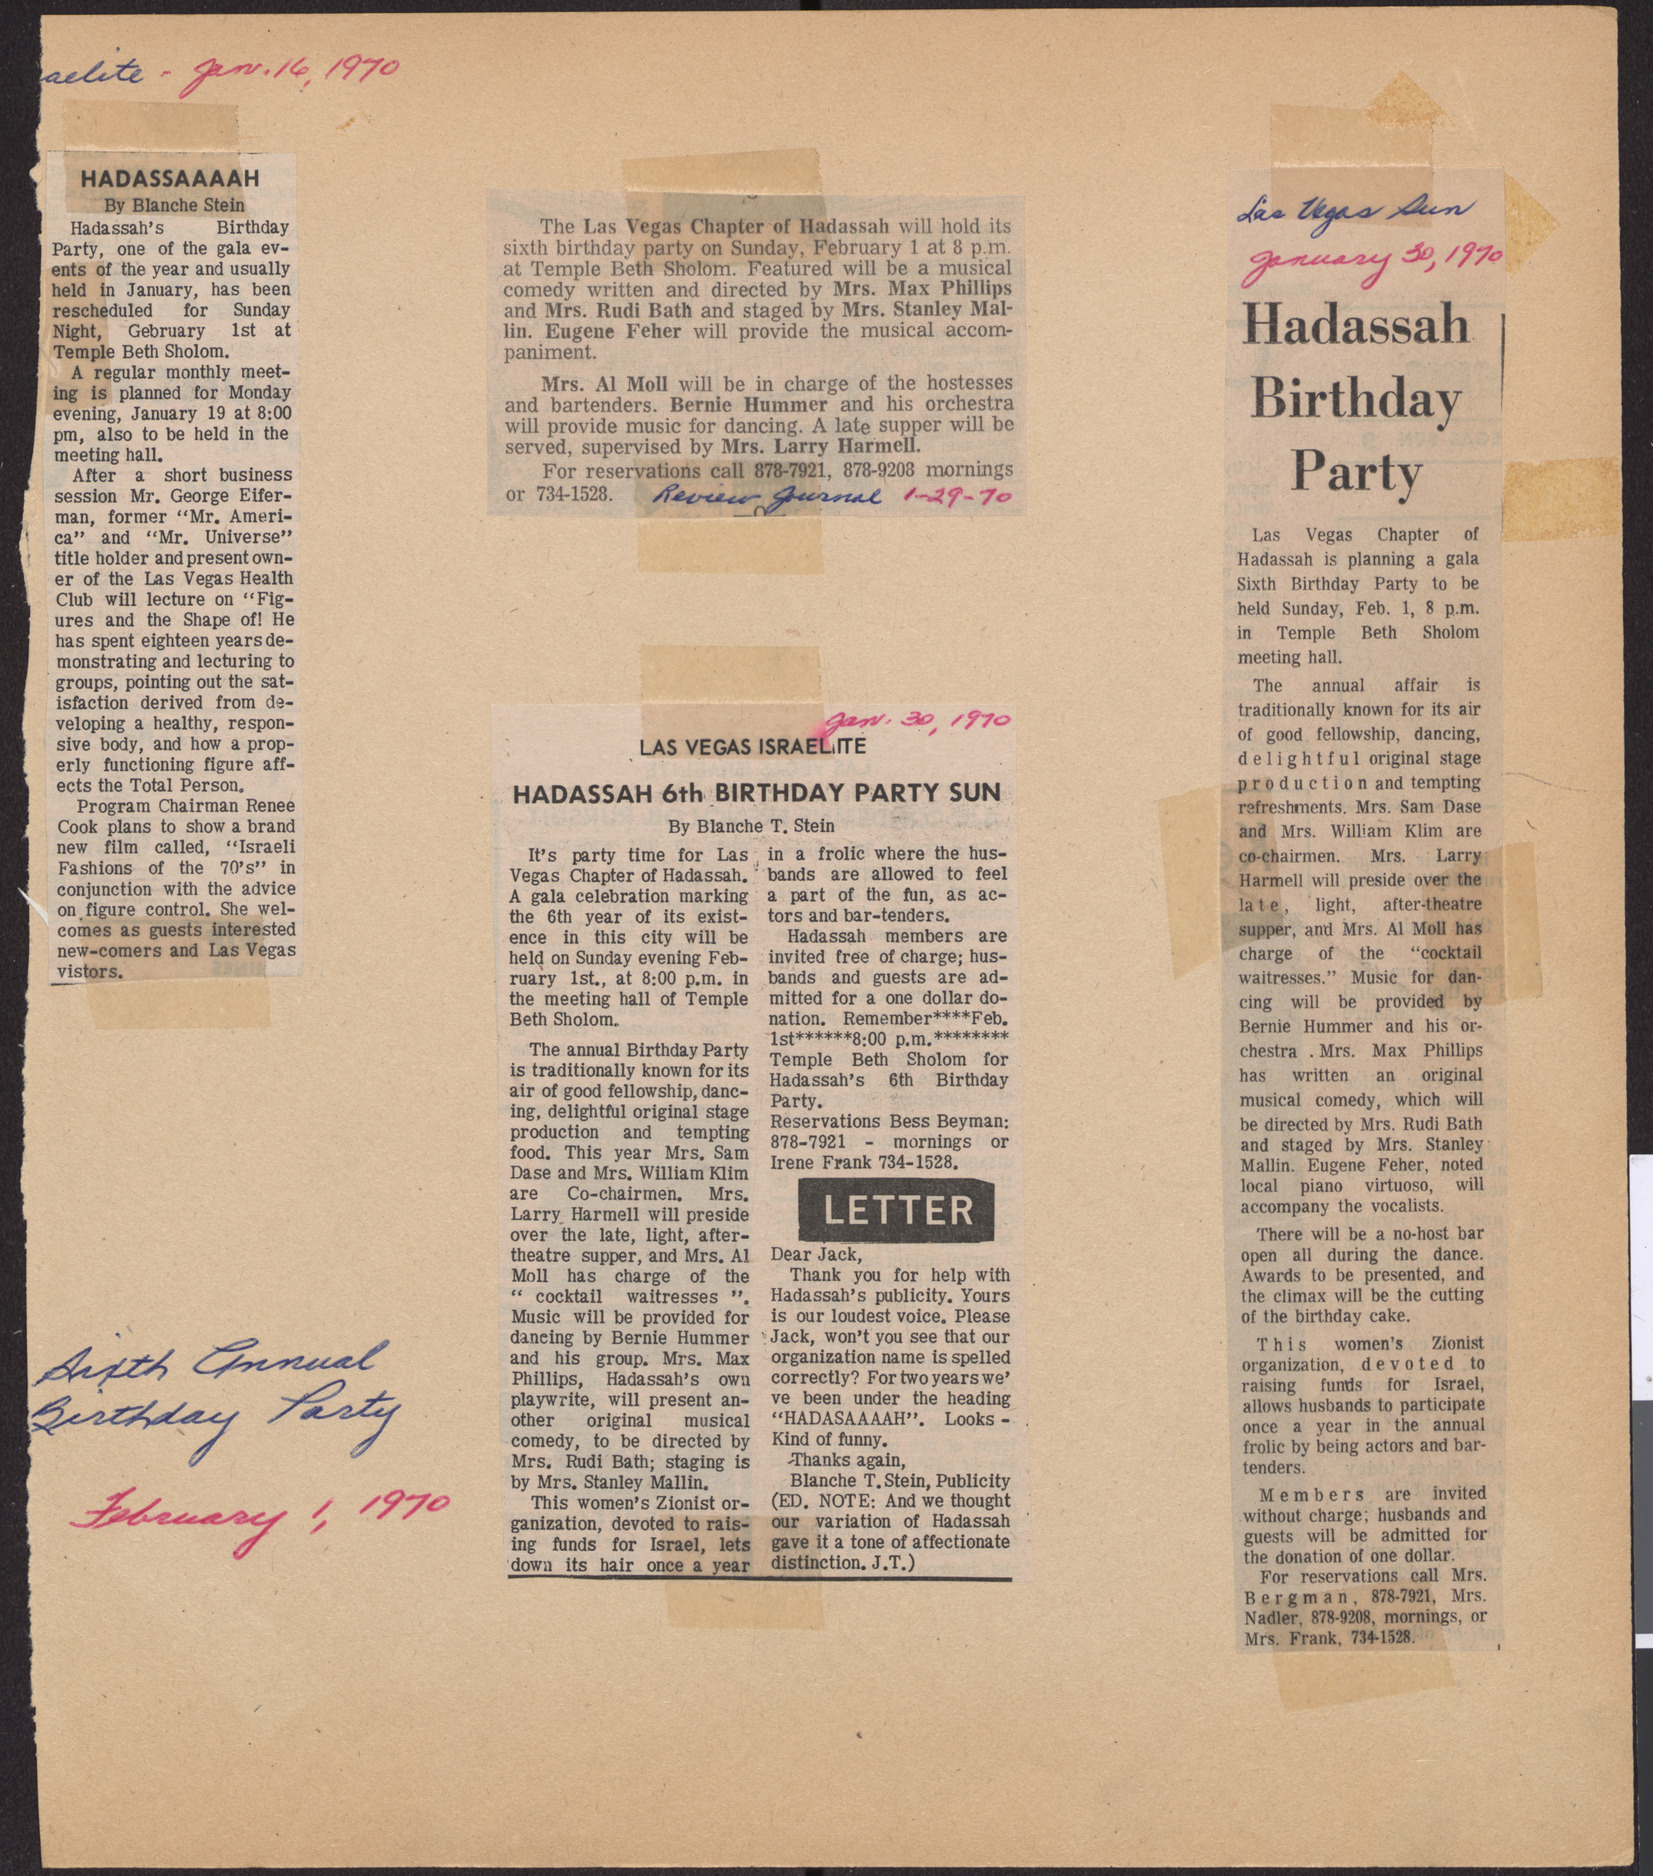 Newspaper clippings about Hadassah's annual birthday party, January 1970